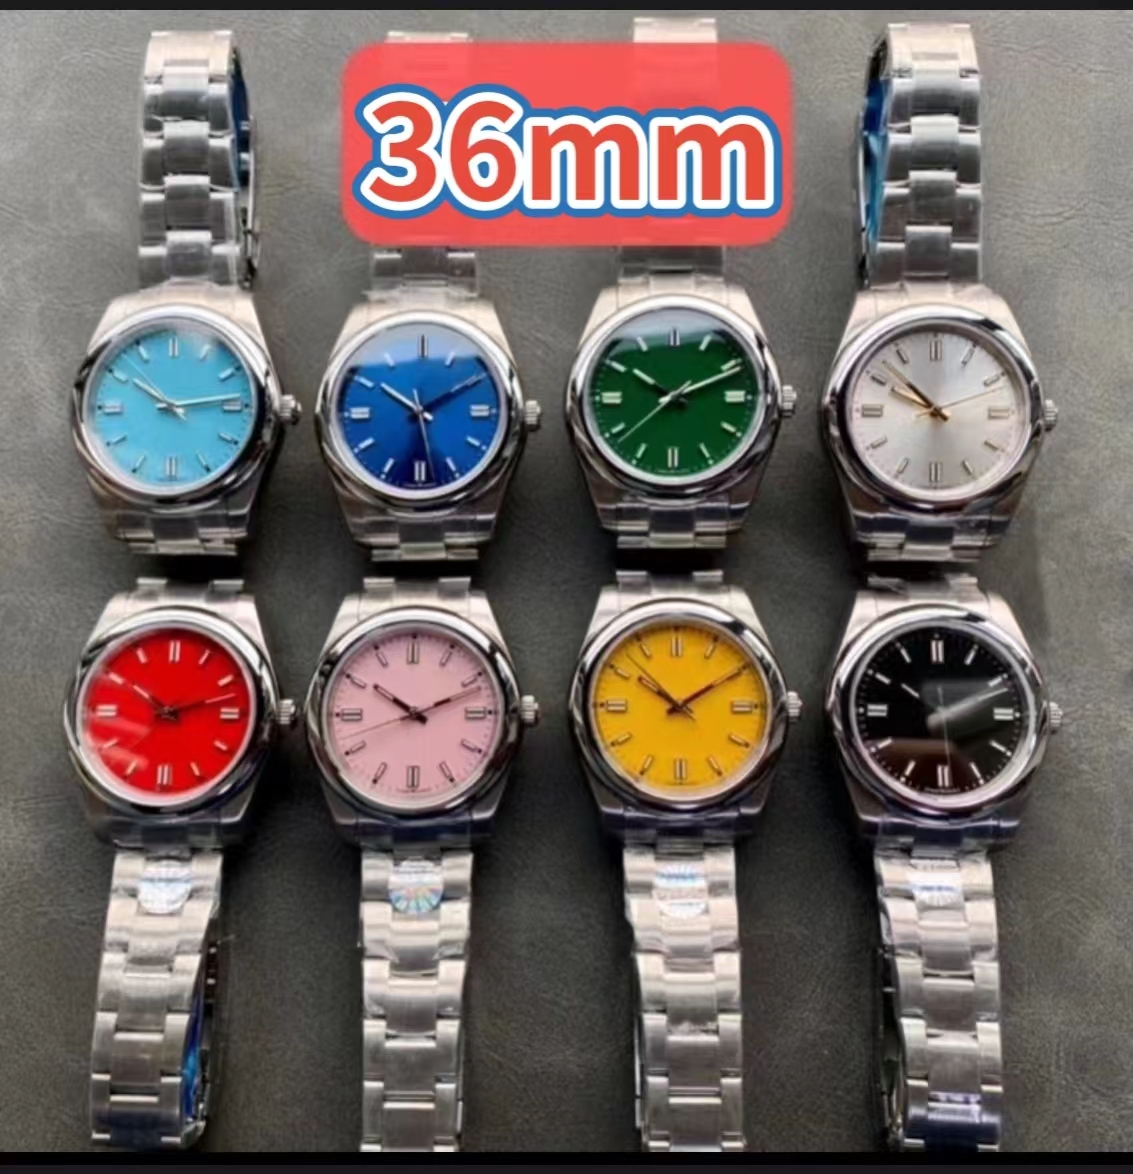 Ladies Mechanical Watch 36mm Silver Case Japanese Original 2813 Movement Automatic Winding Sapphire Glass Face Multicolor Perpetual Watch